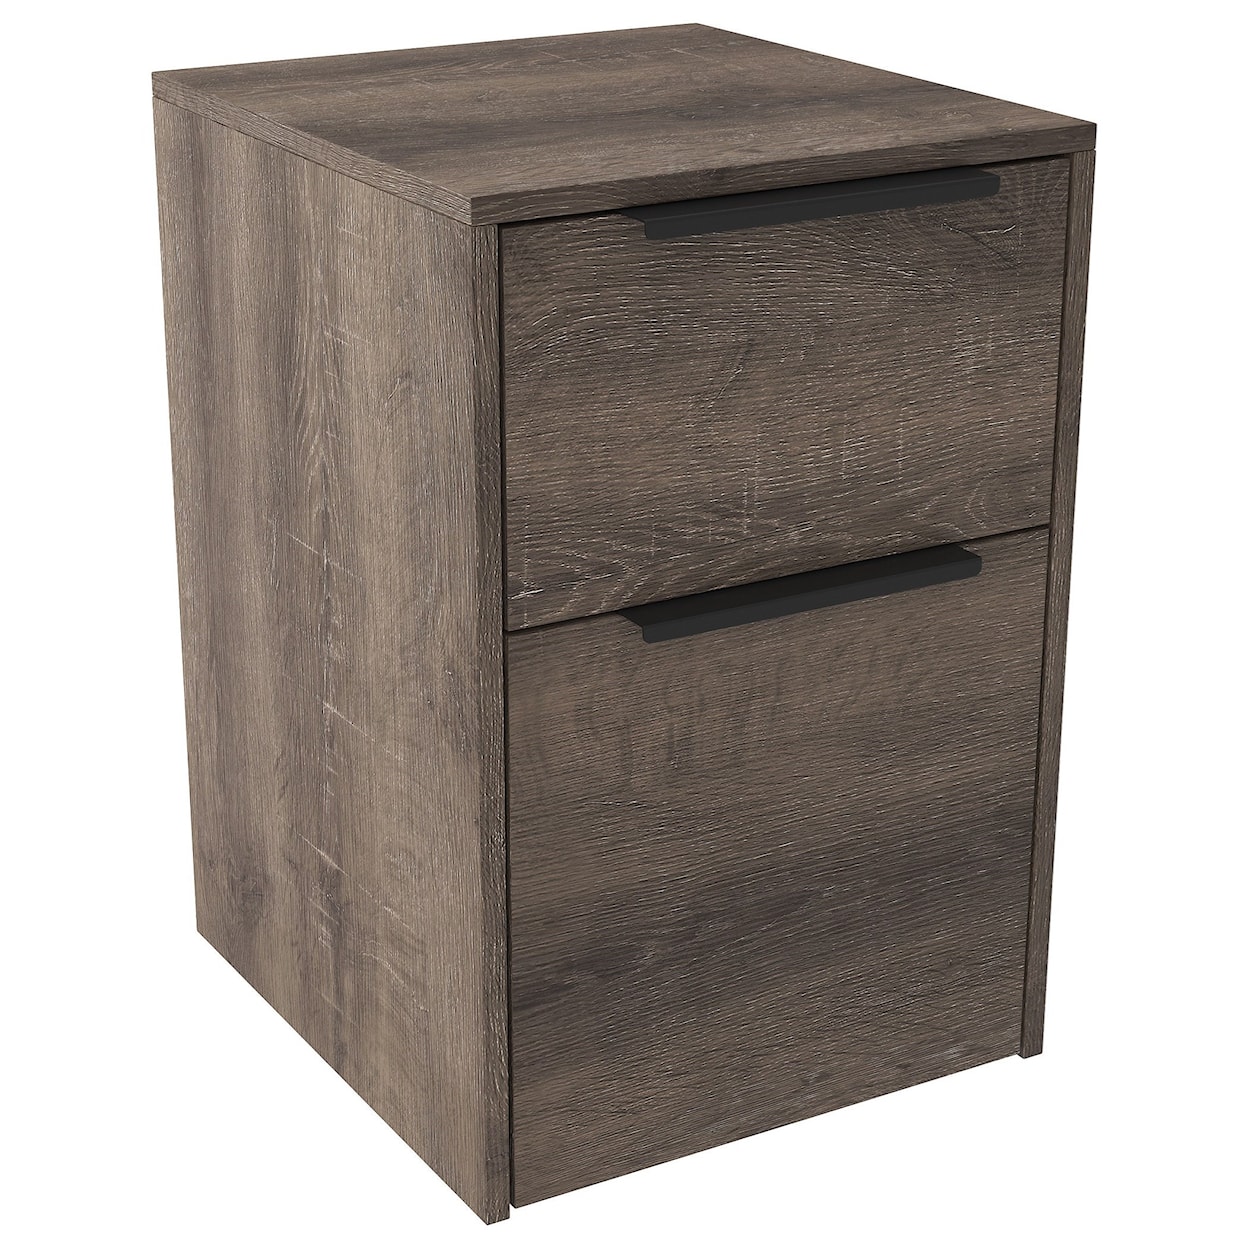 Signature Design by Ashley Arlenbry File Cabinet